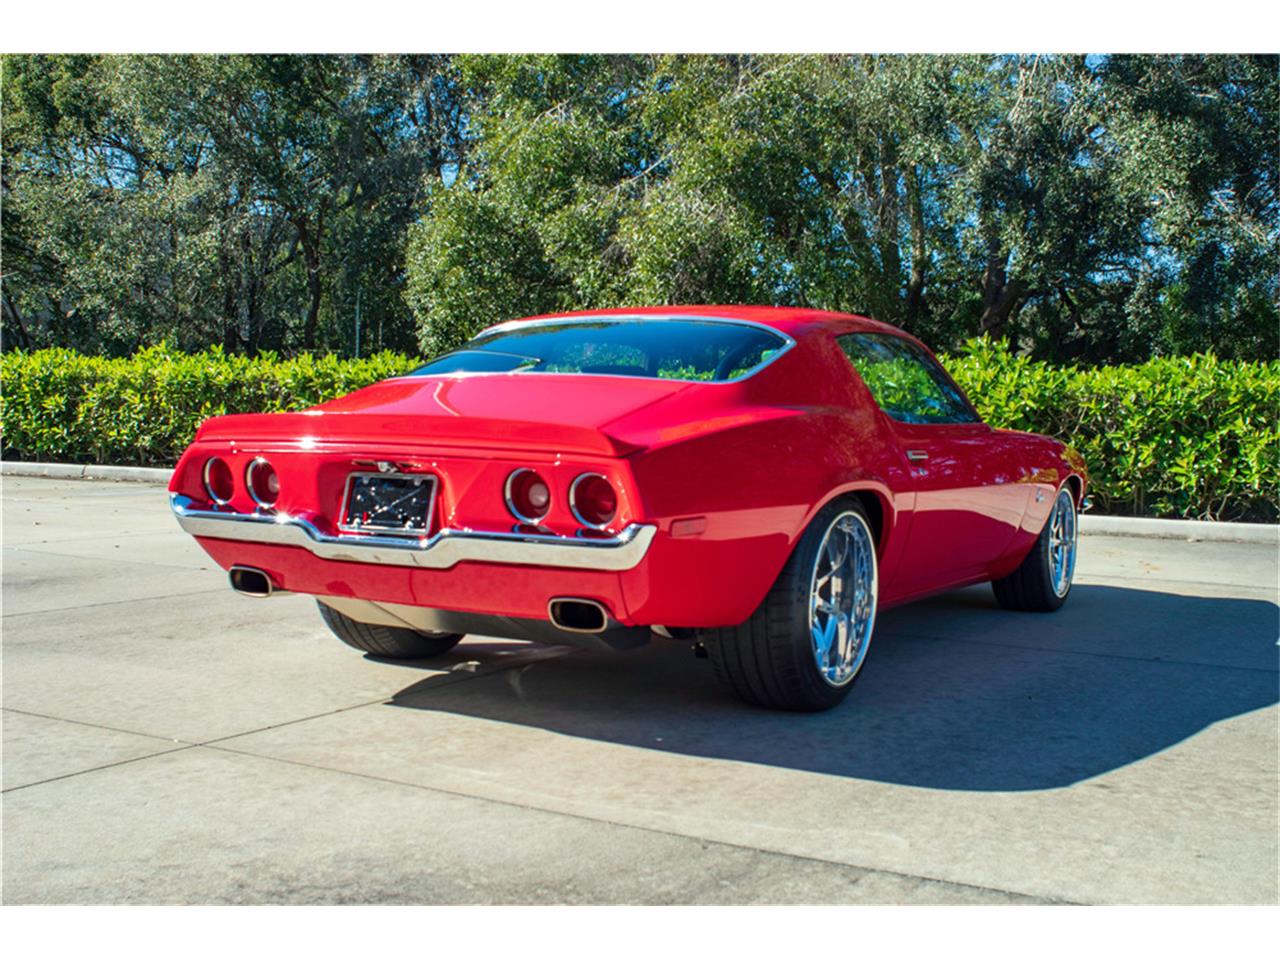 For Sale at Auction: 1970 Chevrolet Camaro for sale in West Palm Beach, FL